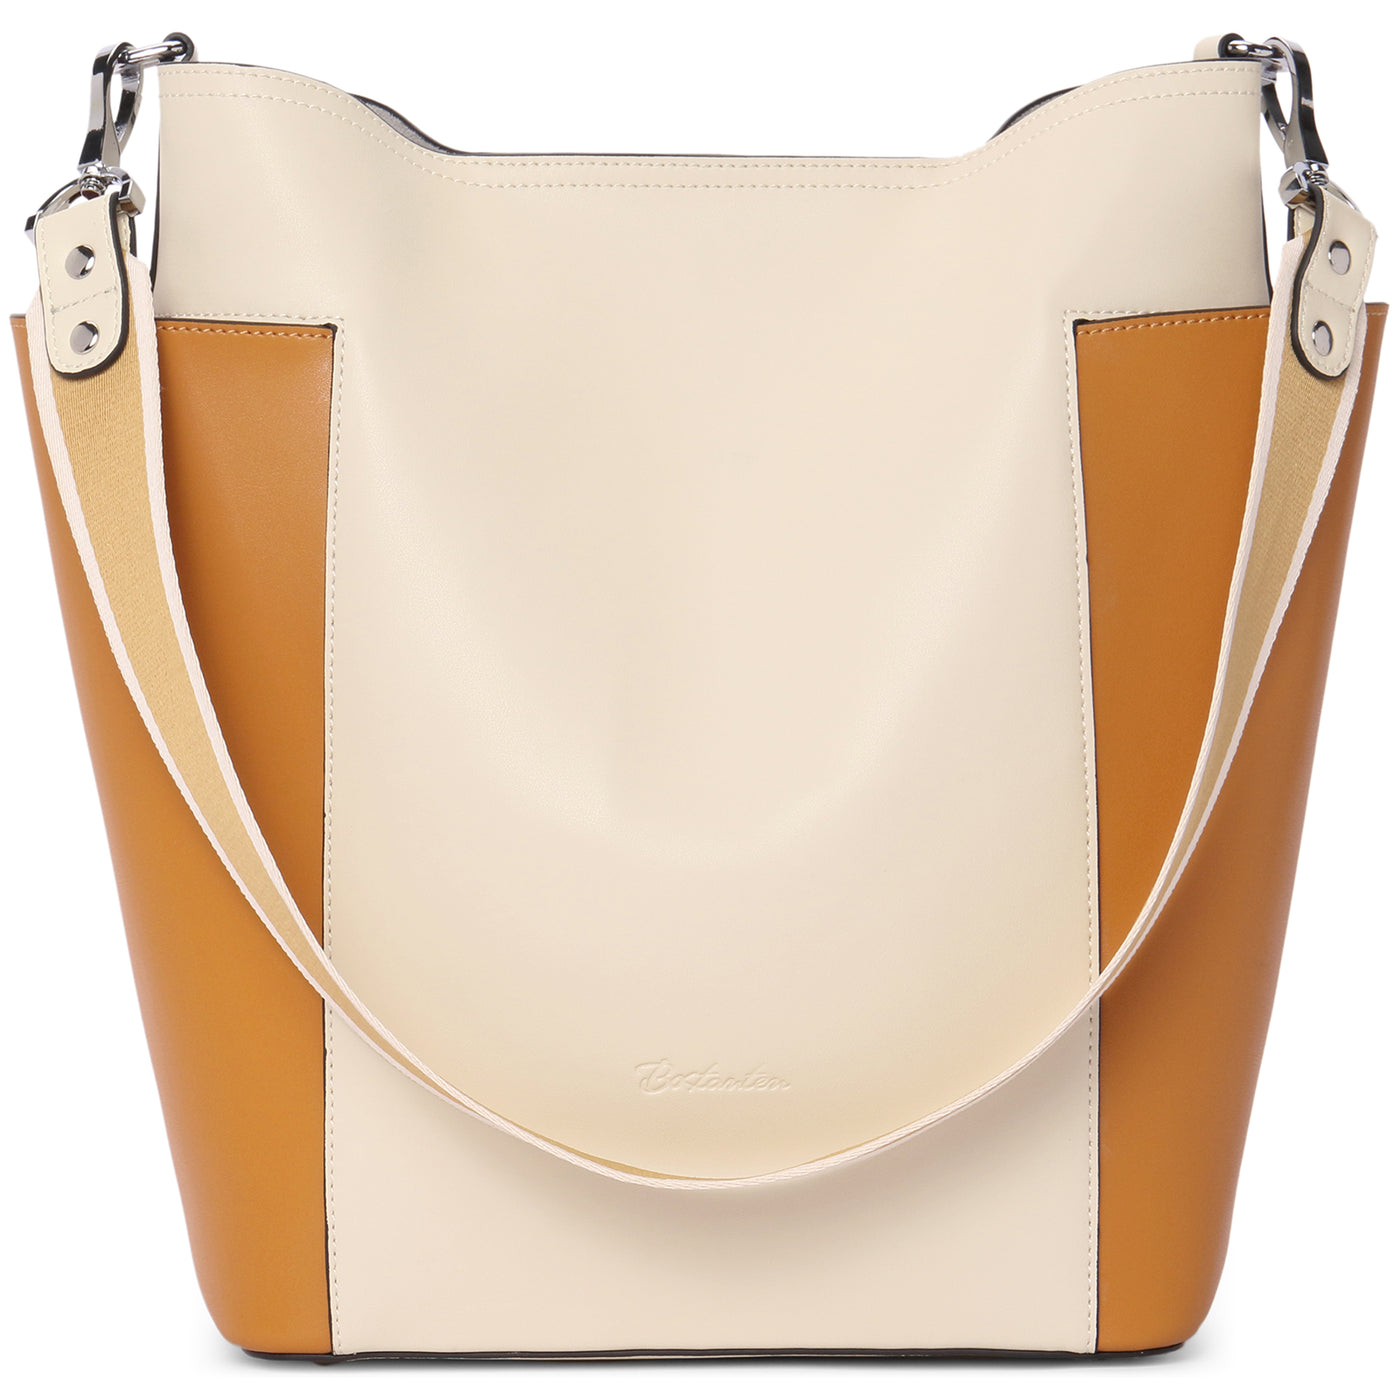 Lotty Functional and Fashionable Buttery Soft Leather Hobo Bag - Beige with Yellow